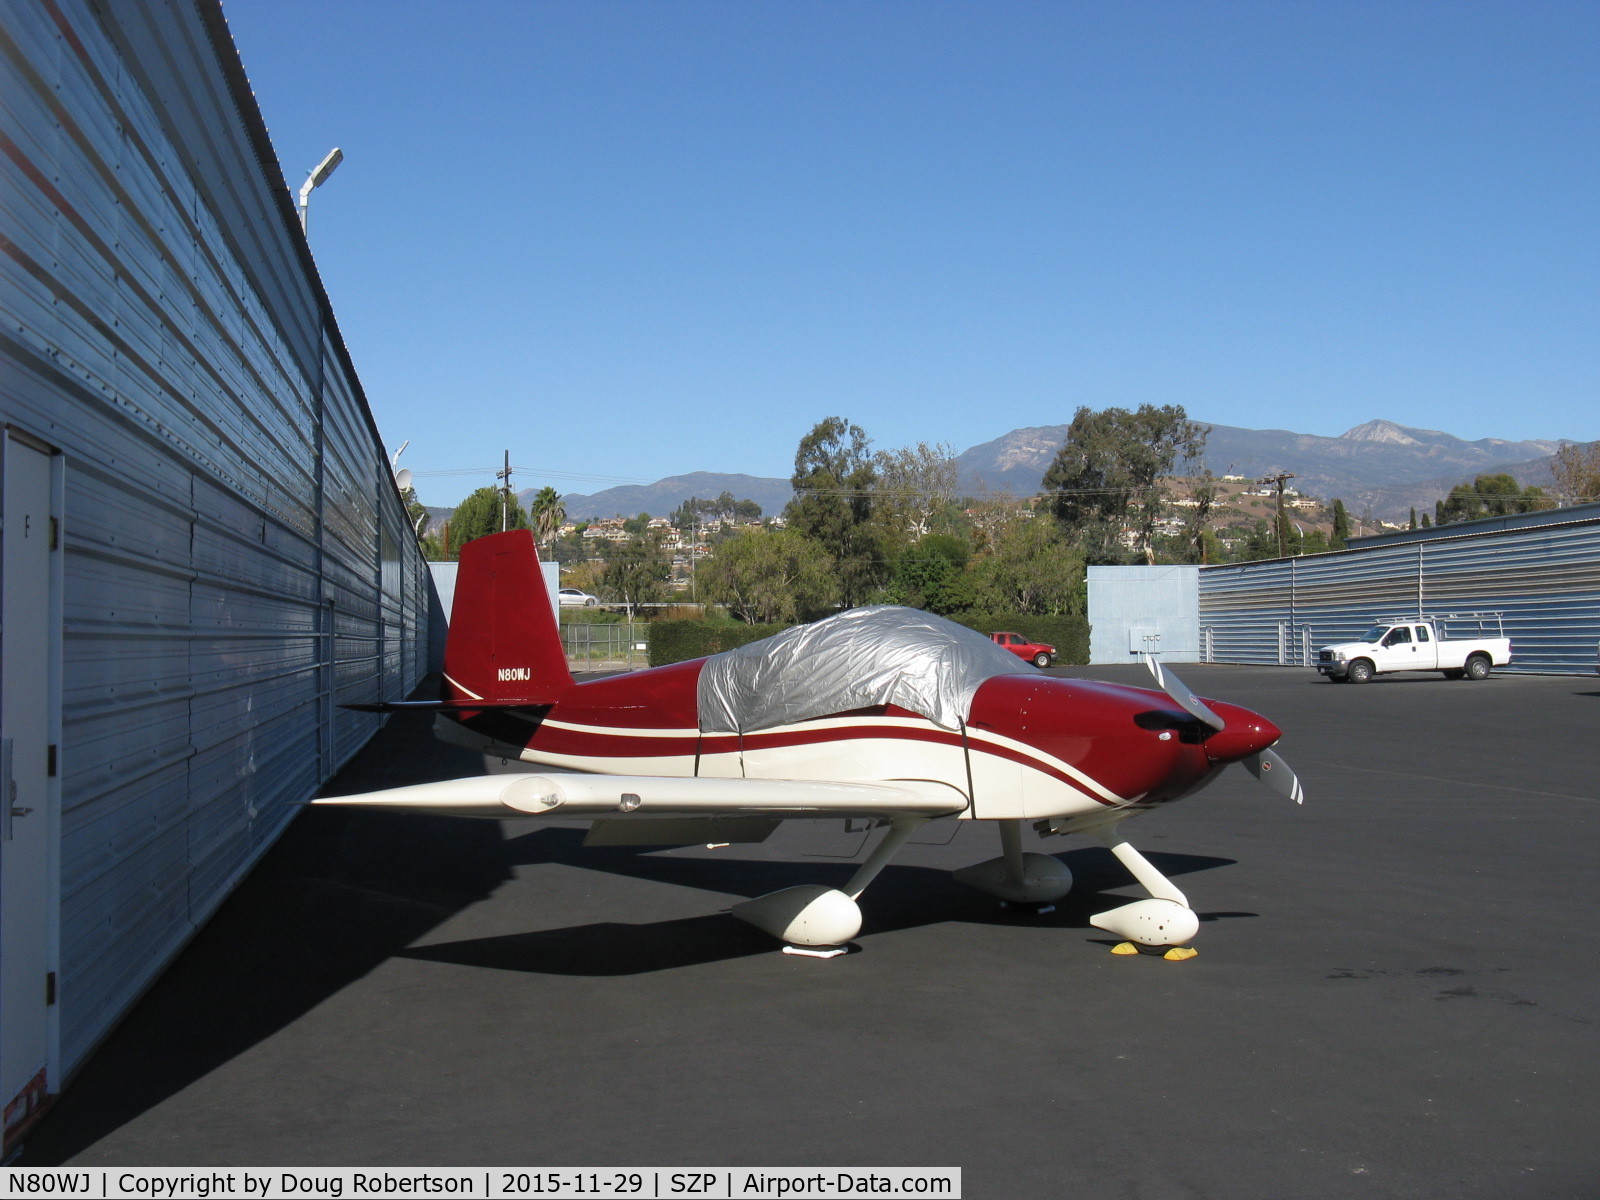 N80WJ, 2014 Vans RV-7A C/N 72575, 2015 Richmond VAN's RV-7A, ECI TITAN IOX-360-A4H1N 191 Hp, excellent appearance and flyer